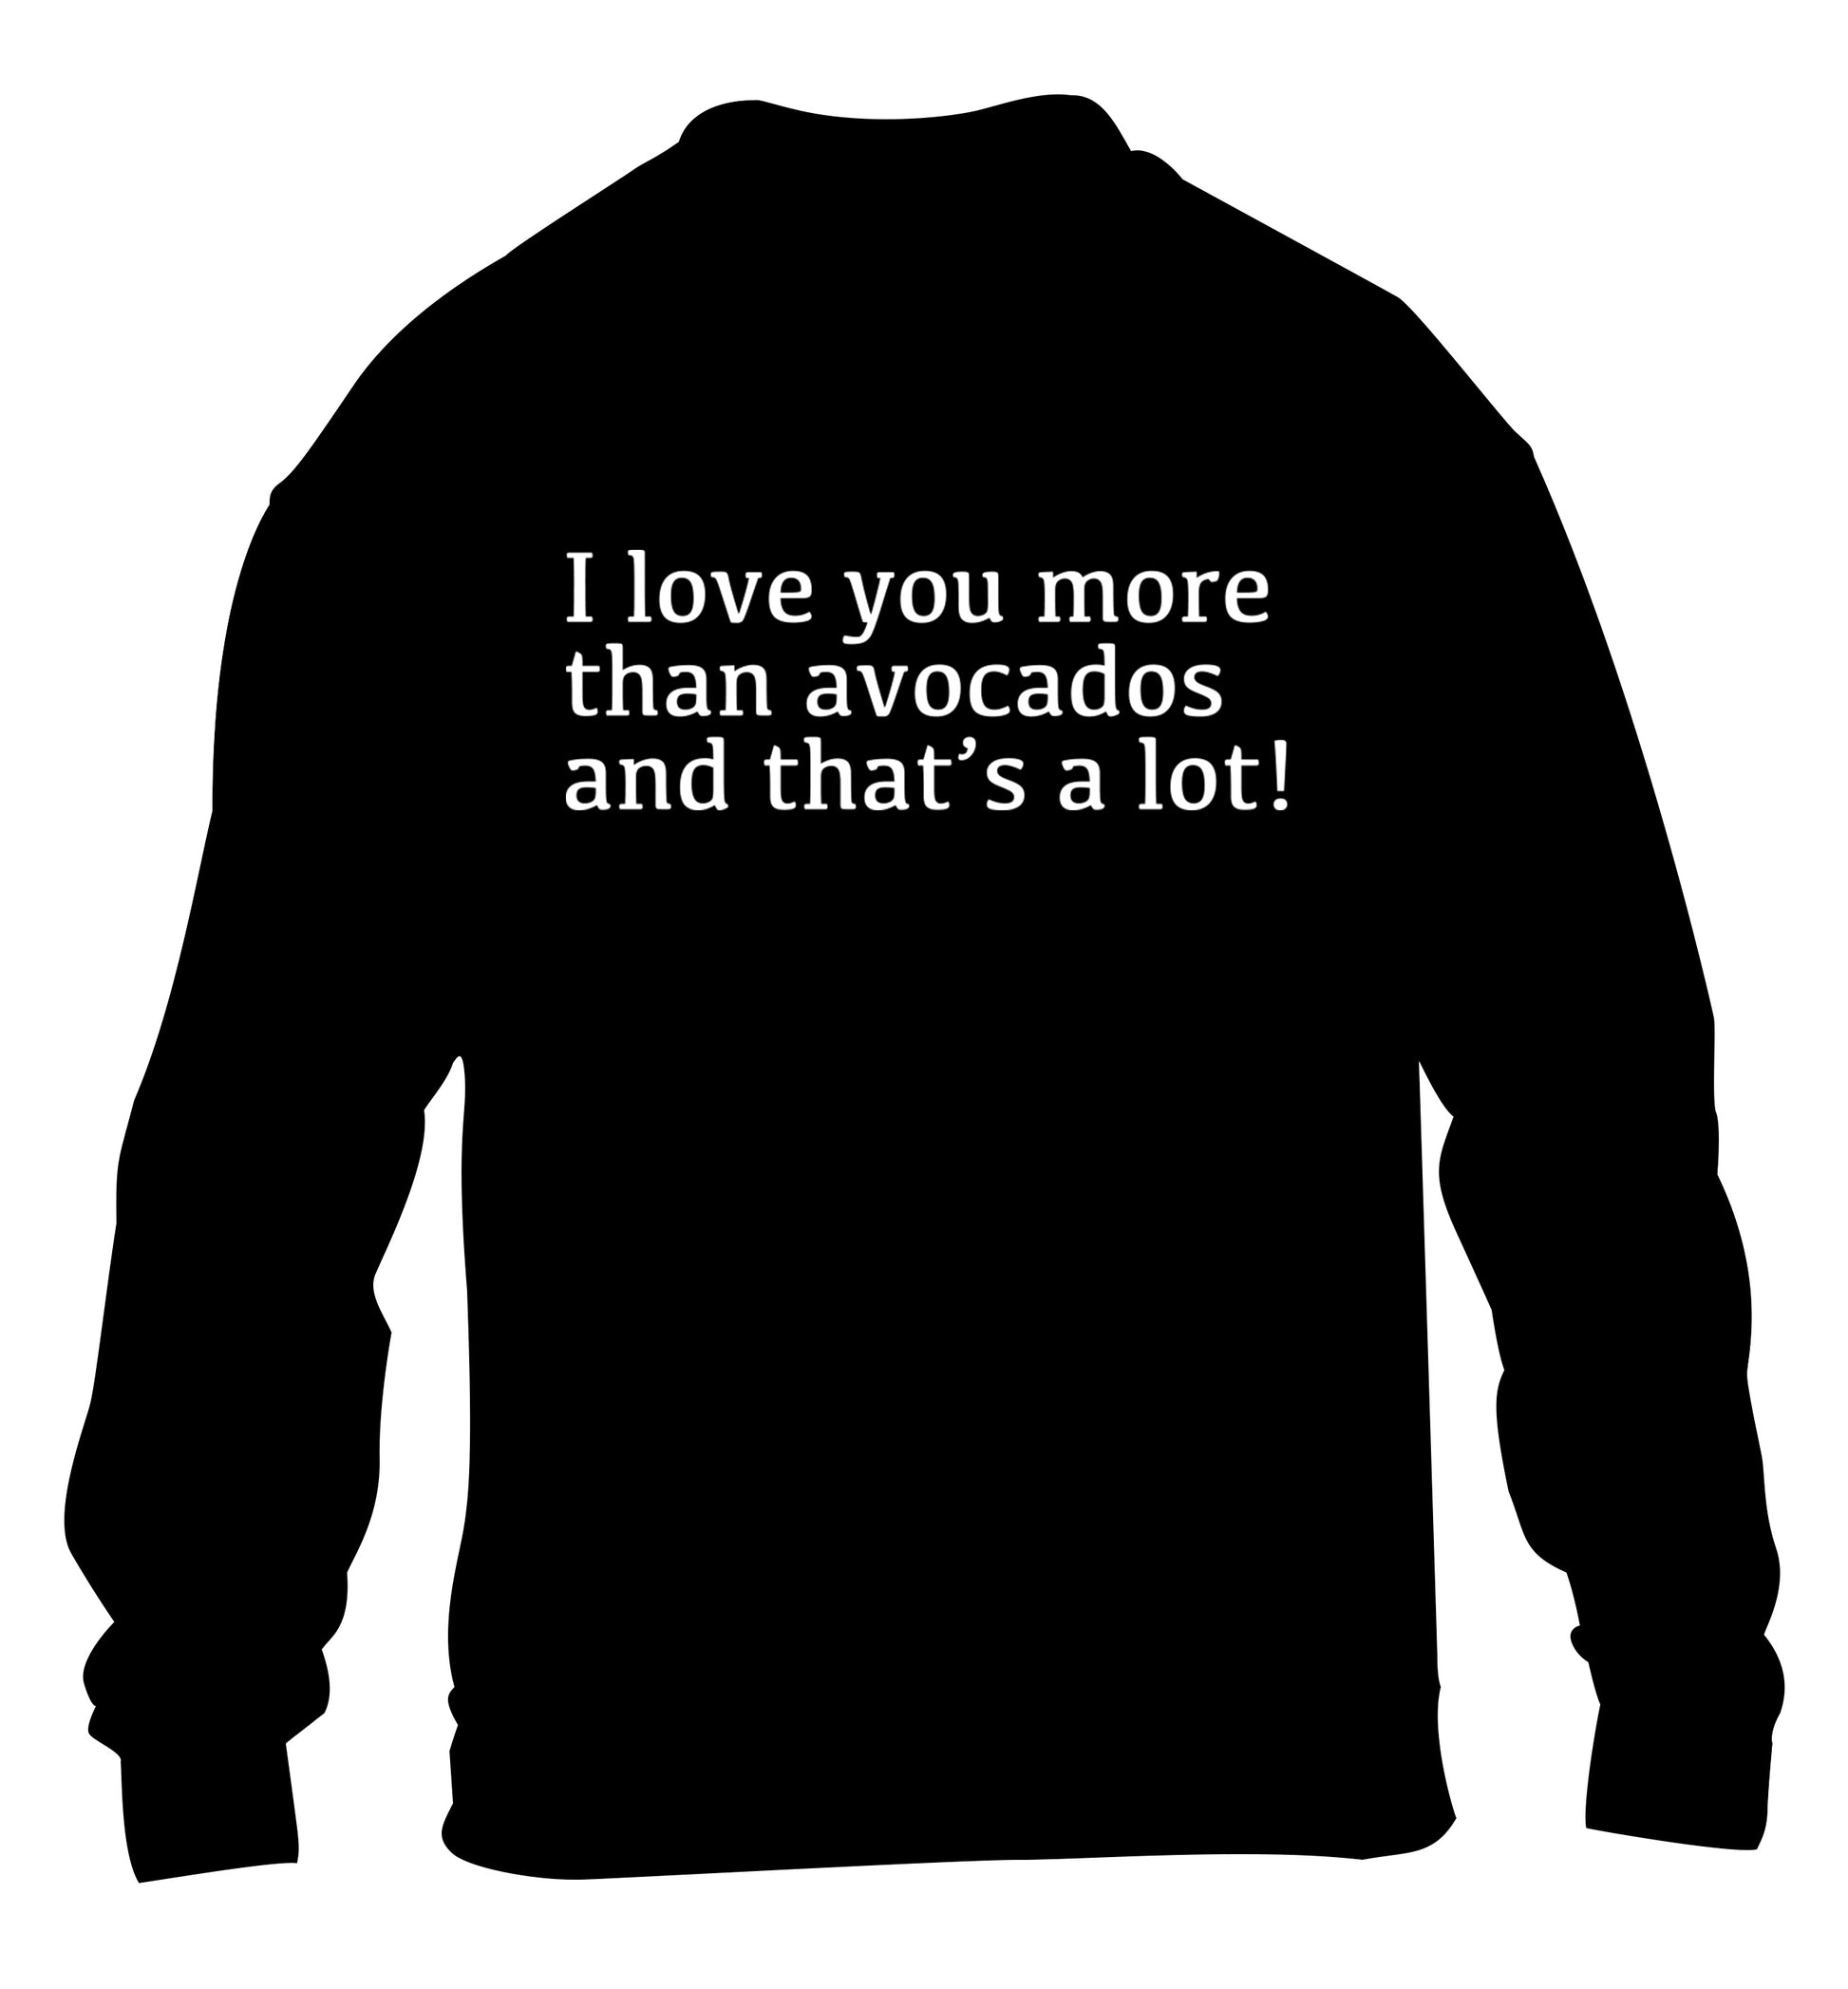 I love you more than avocados and that's a lot children's black sweater 12-14 Years